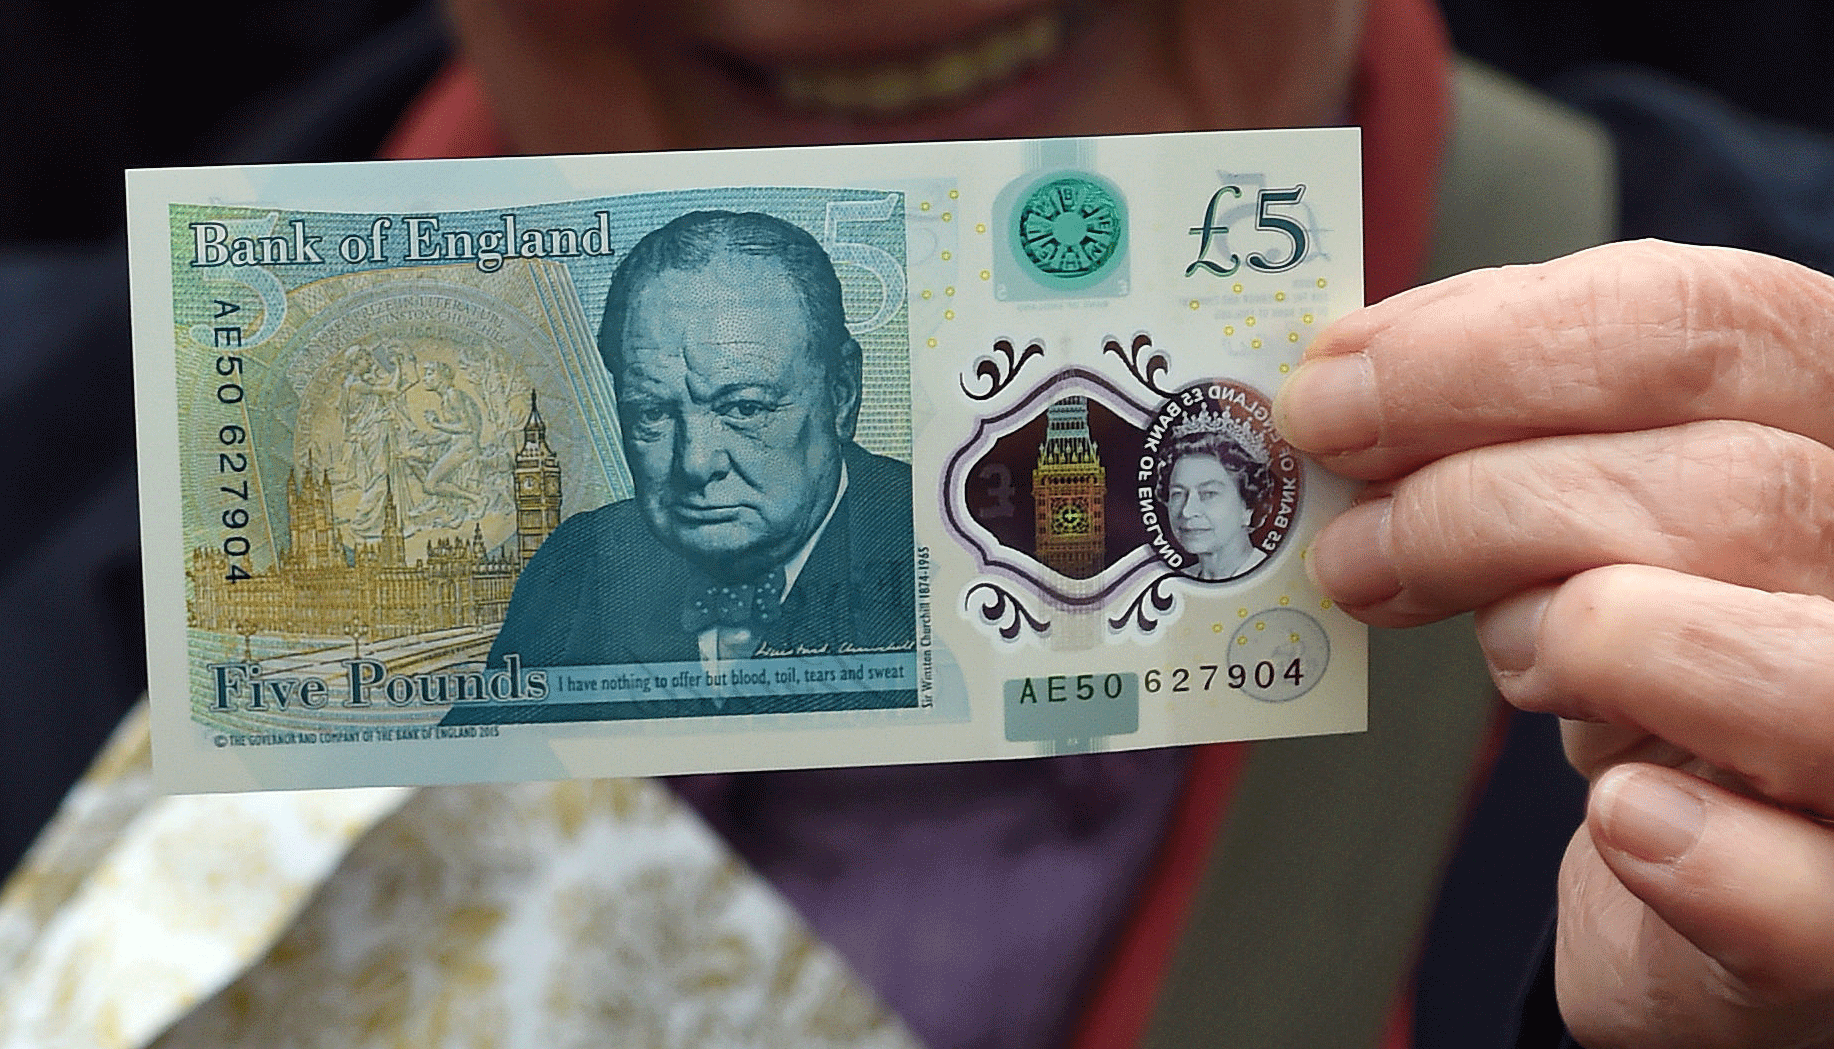 New £5 notes contain animal fat and people are outraged